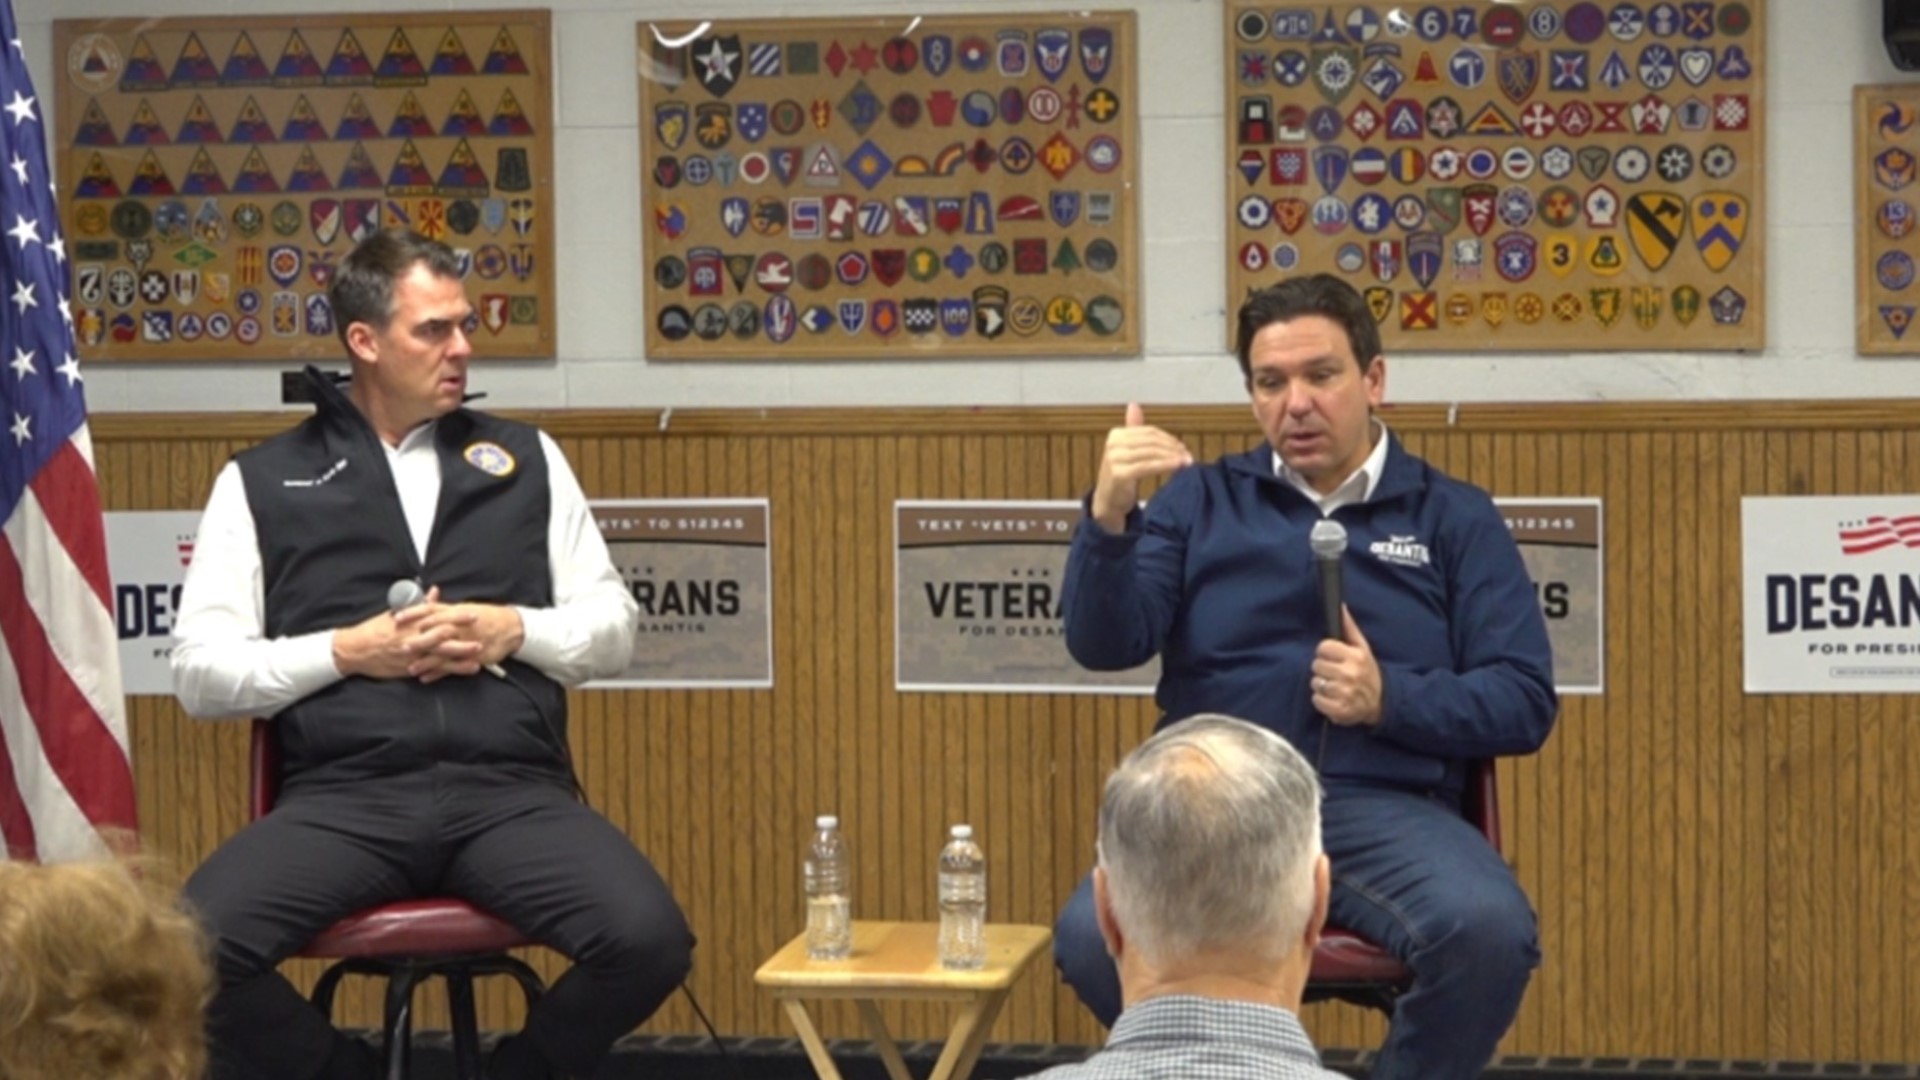 With just three weeks to go until the Iowa caucuses, Gov. Kevin Stitt is hoping to persuade Iowans that Gov. Ron DeSantis is the man to beat President Joe Biden.